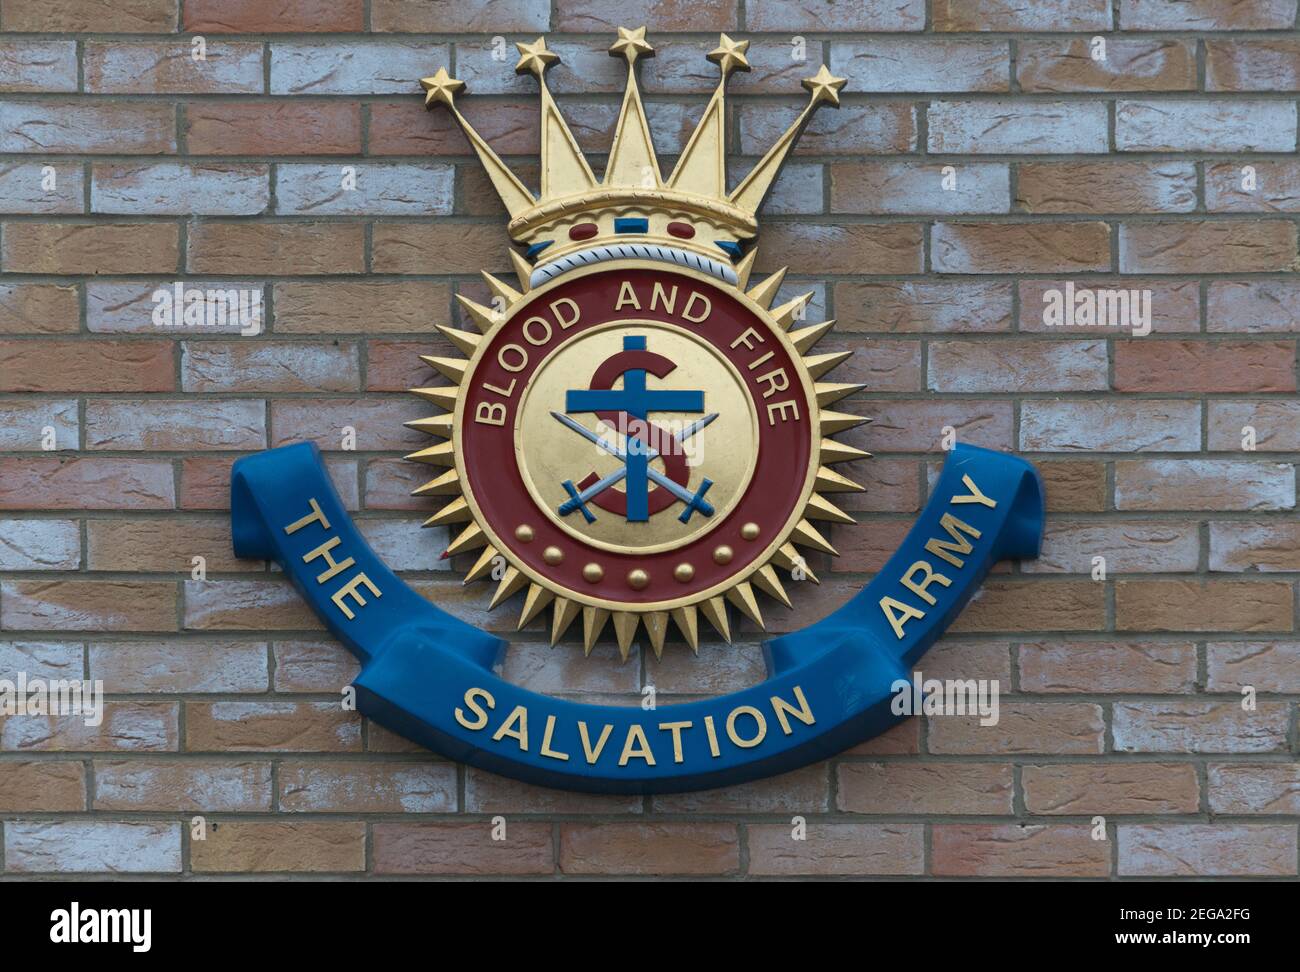 Salvation Army Emblem on a building Stock Photo